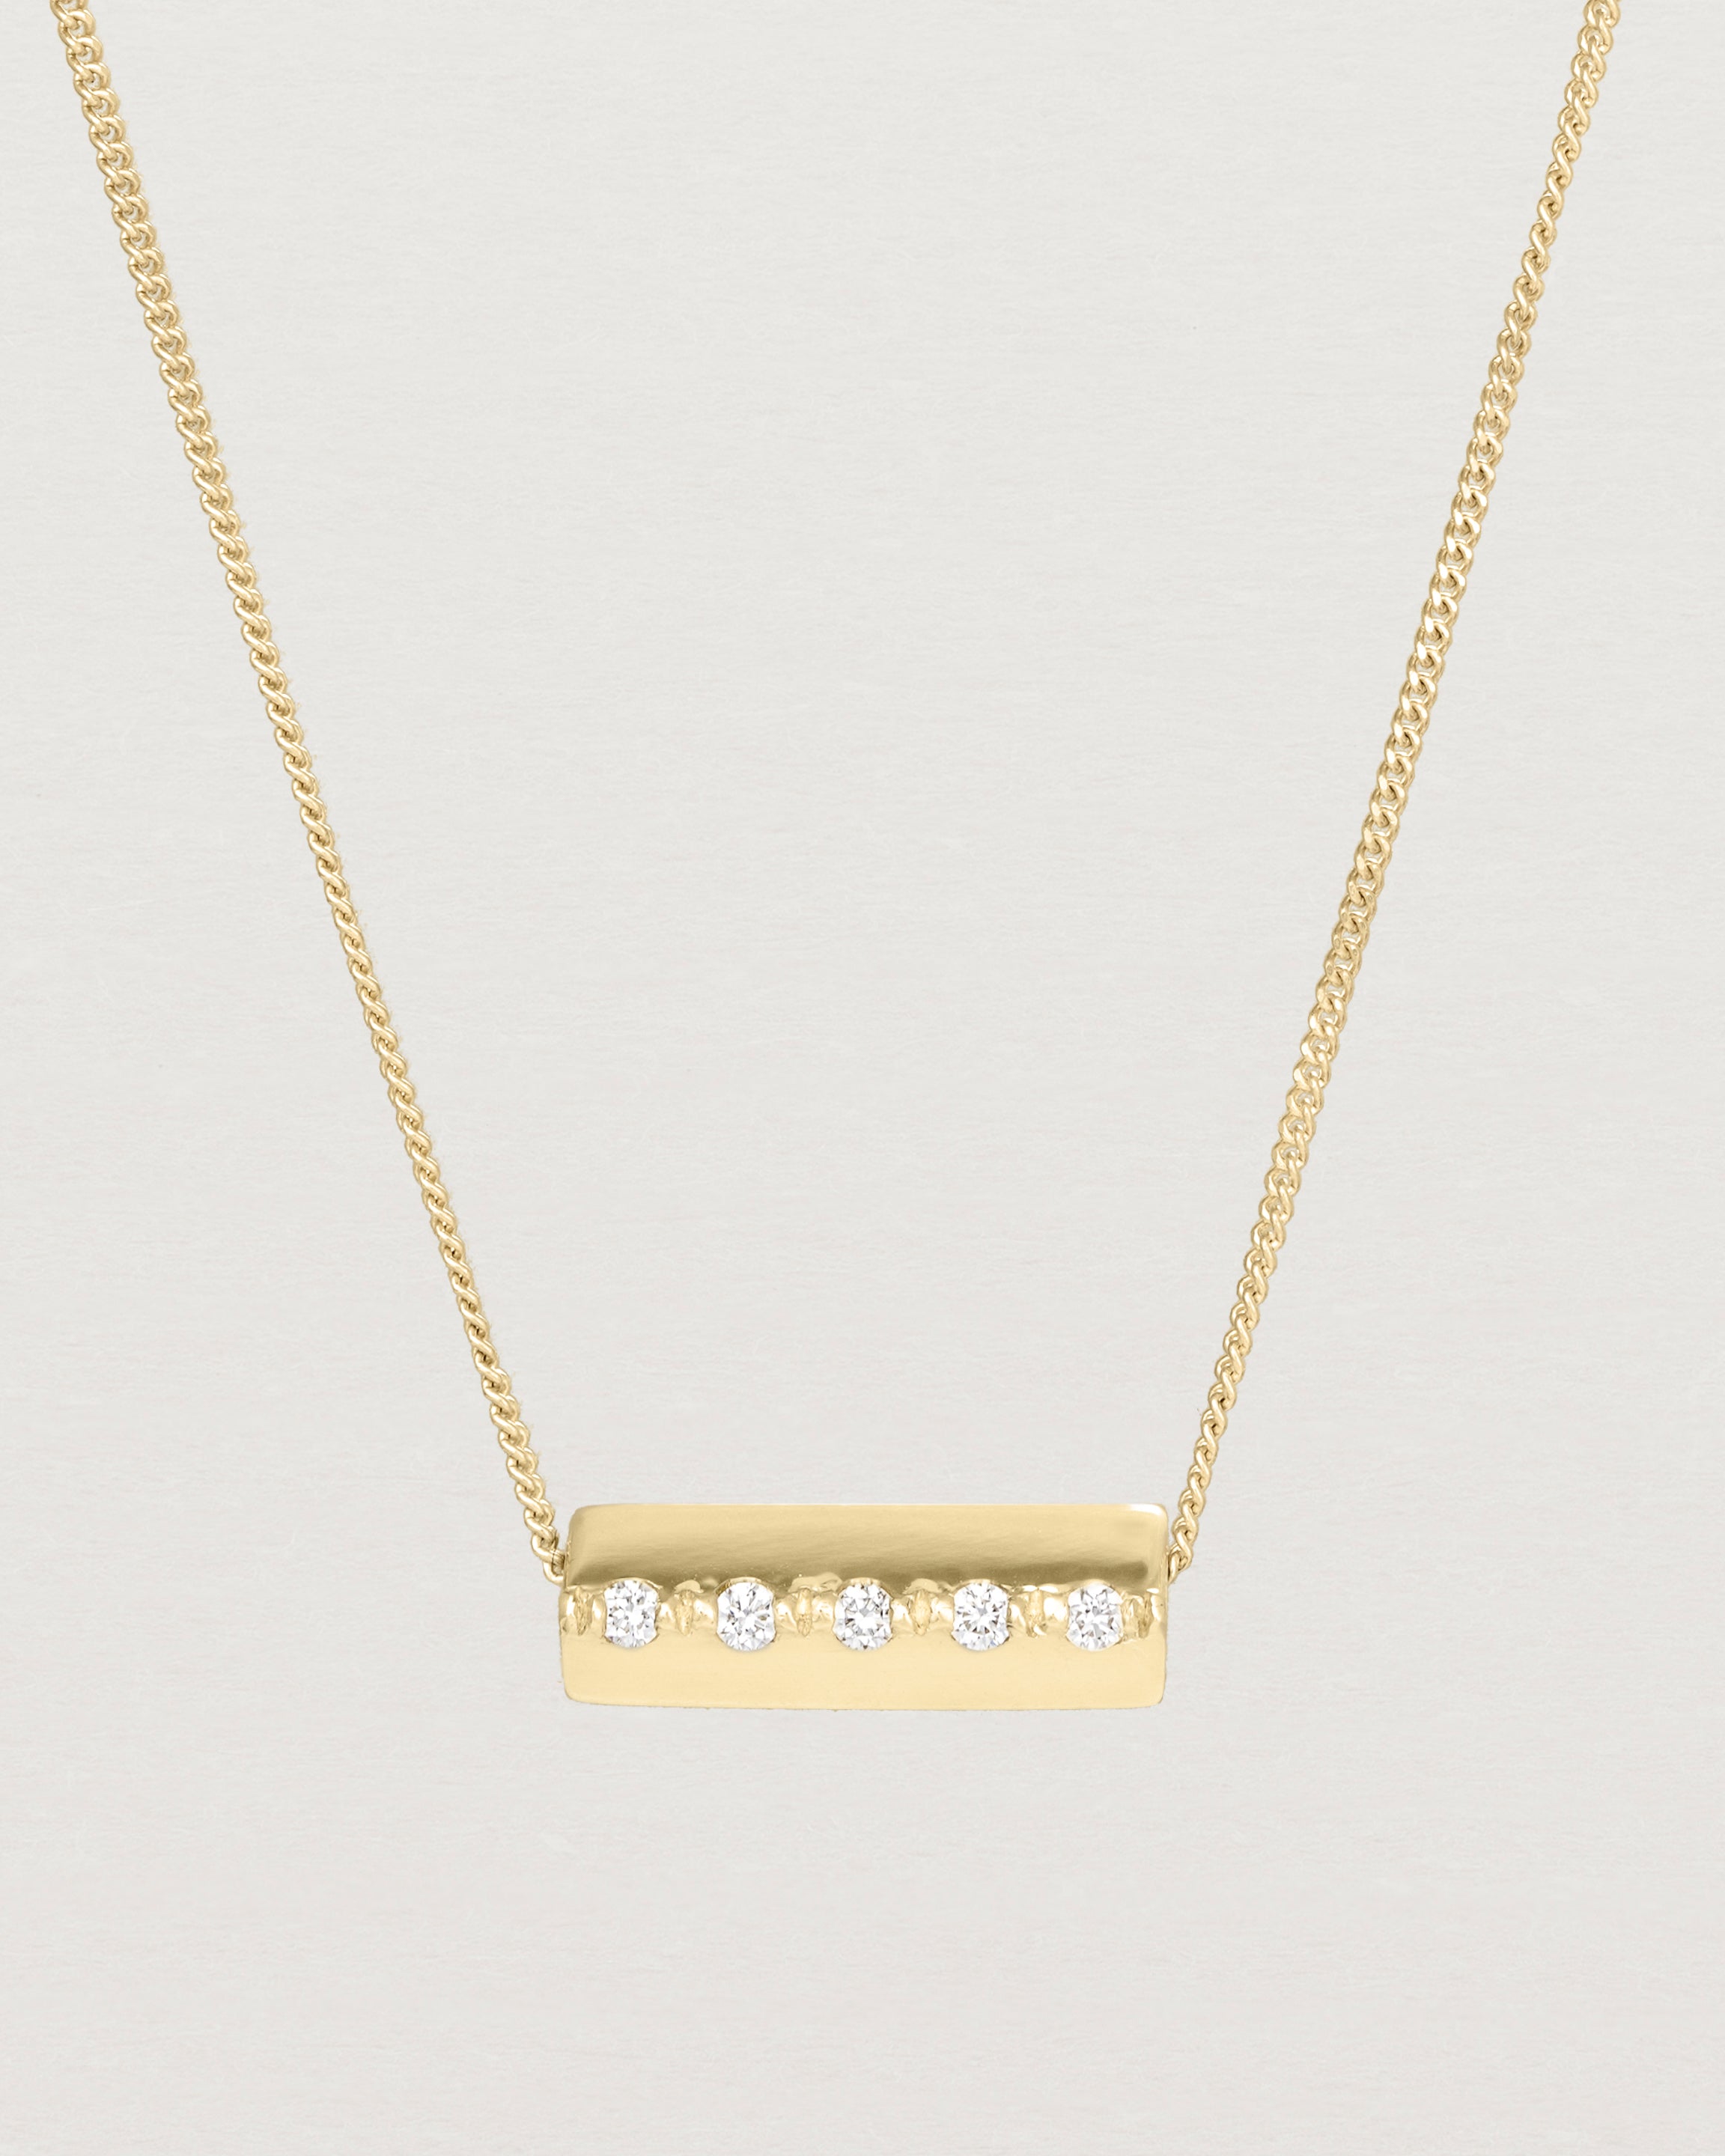 Close up view of the Cascade Knife Edge Necklace | Diamonds in yellow gold.